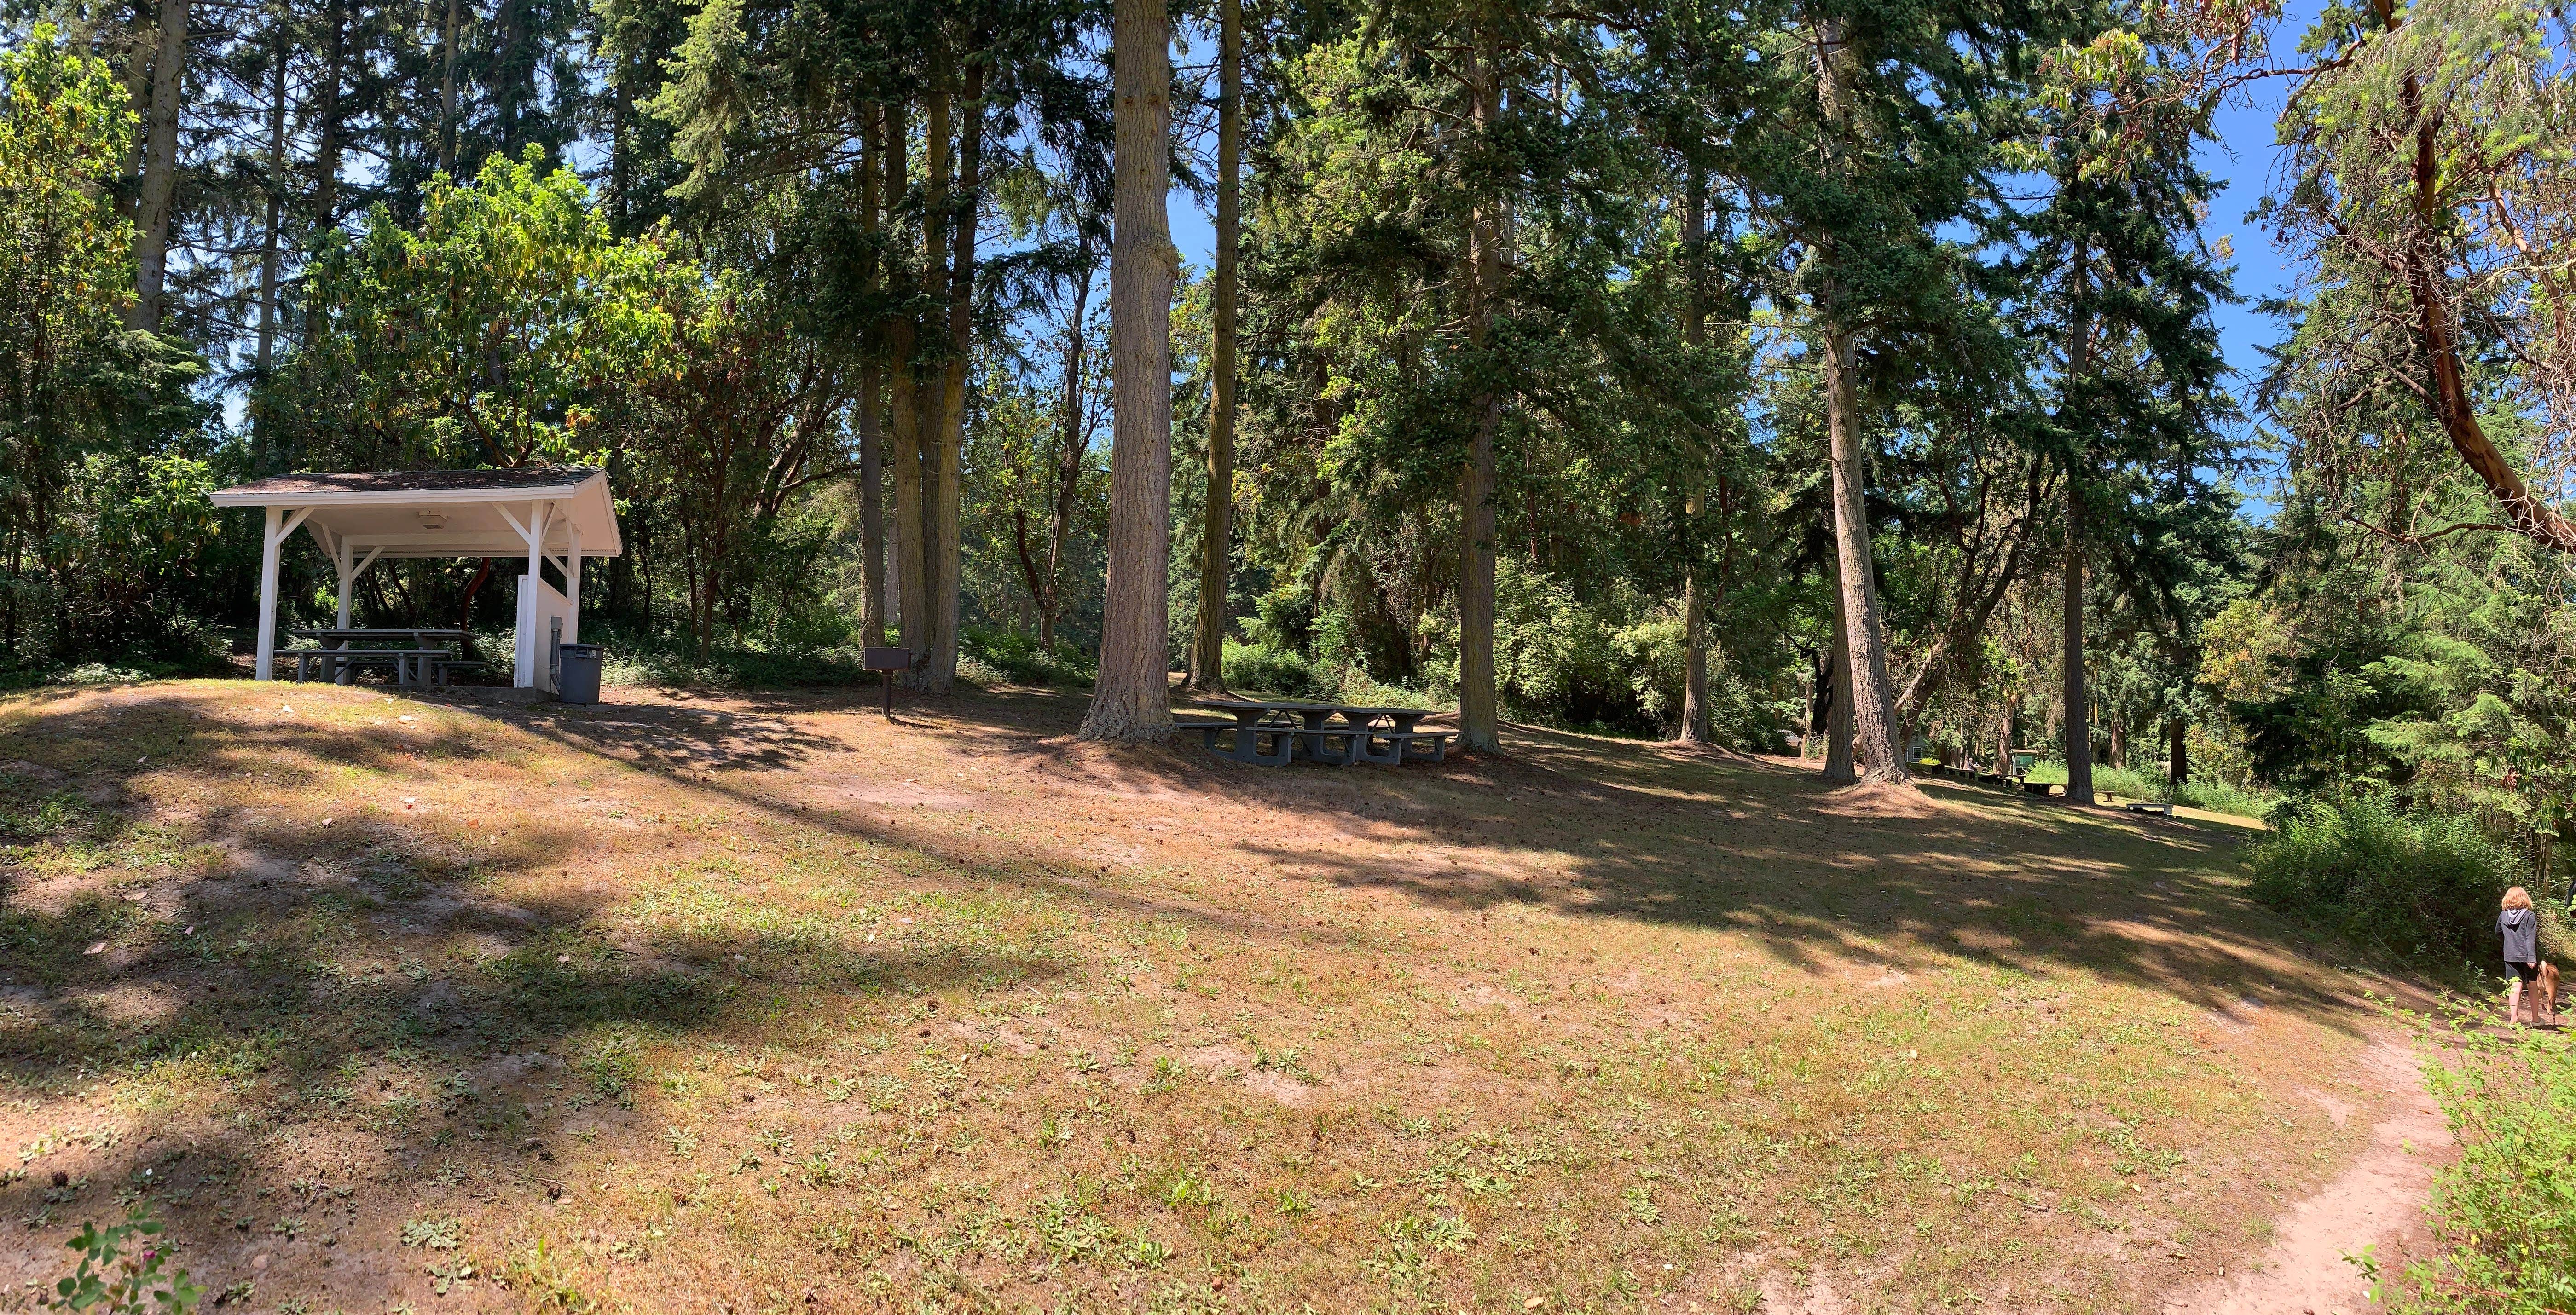 One of the covered picnic areas along the walking trail